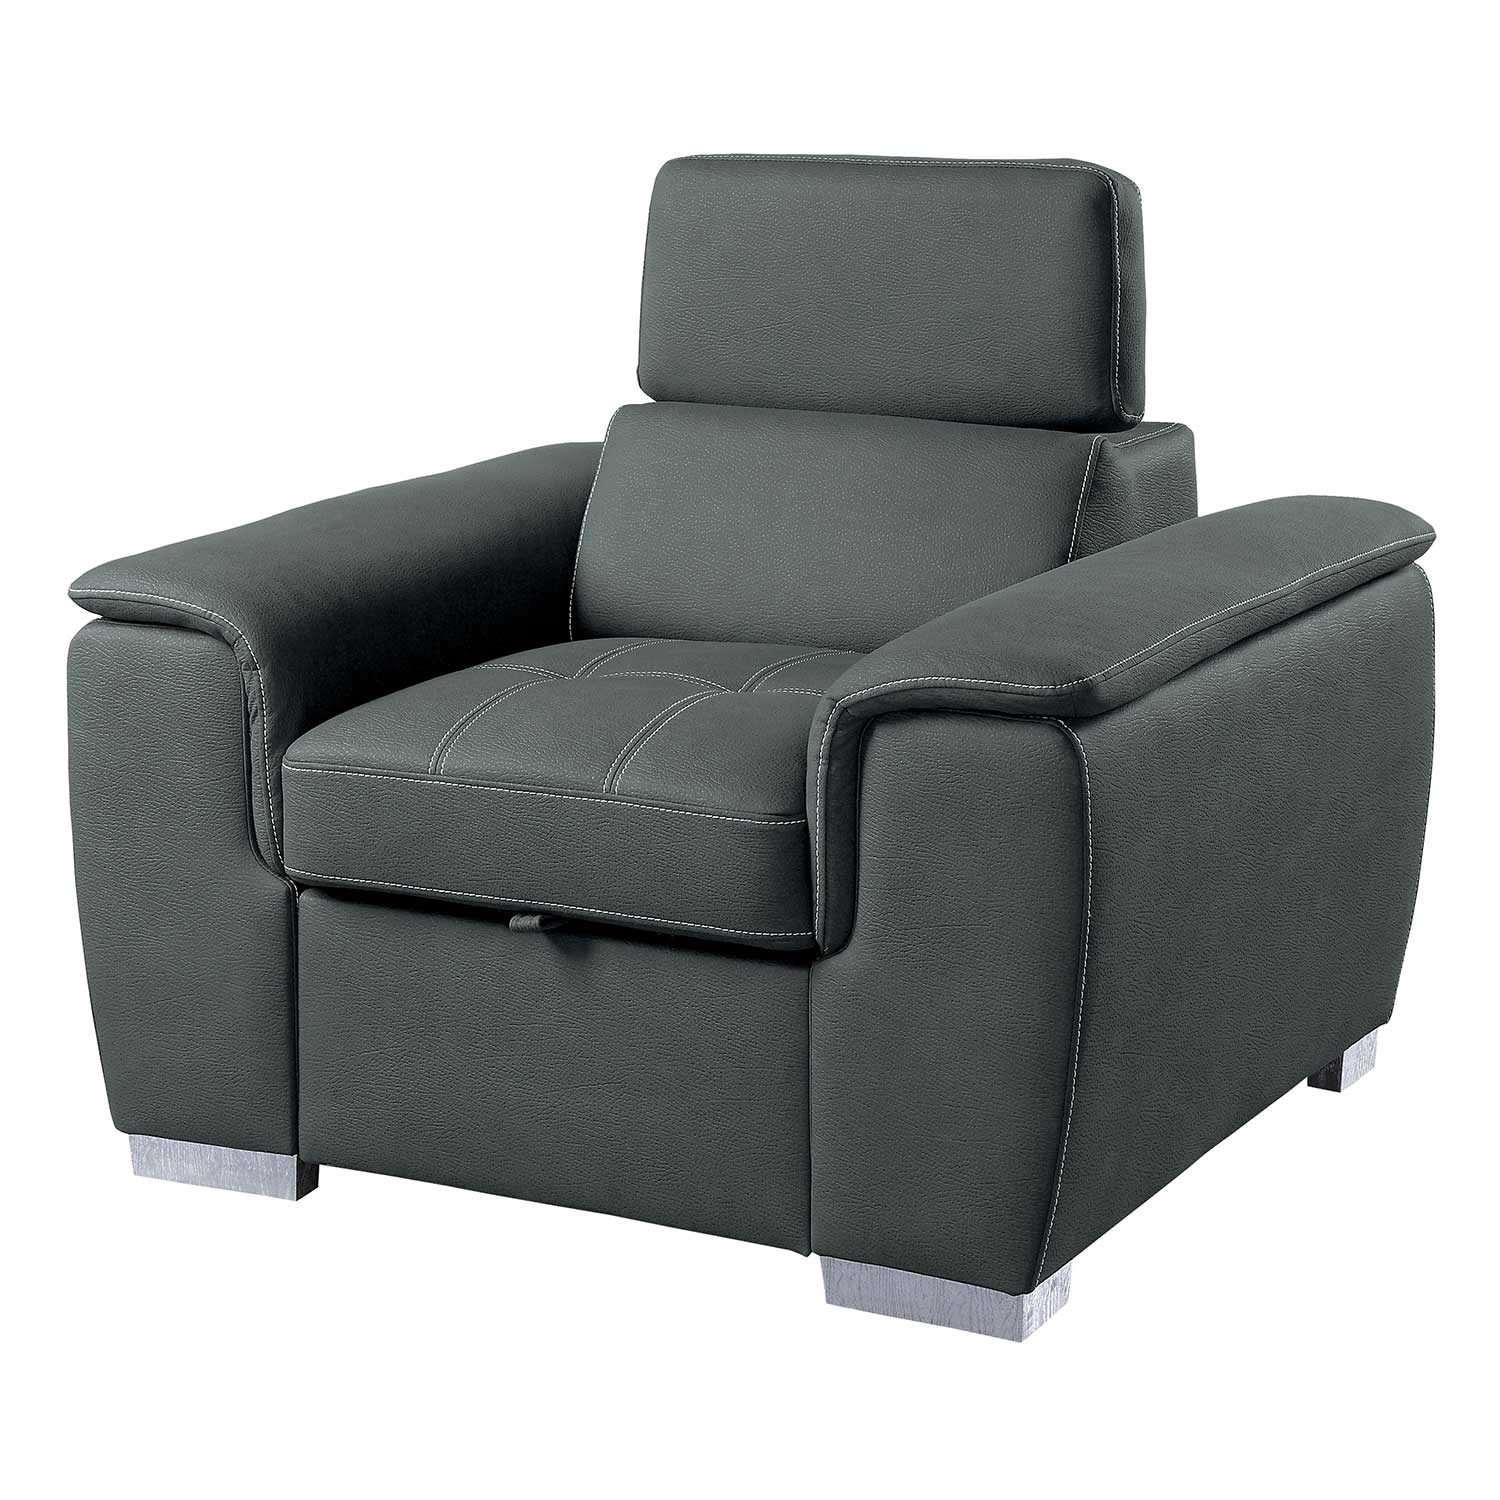 Homelegance Ferriday Chair with Pull-out Ottoman - Gray